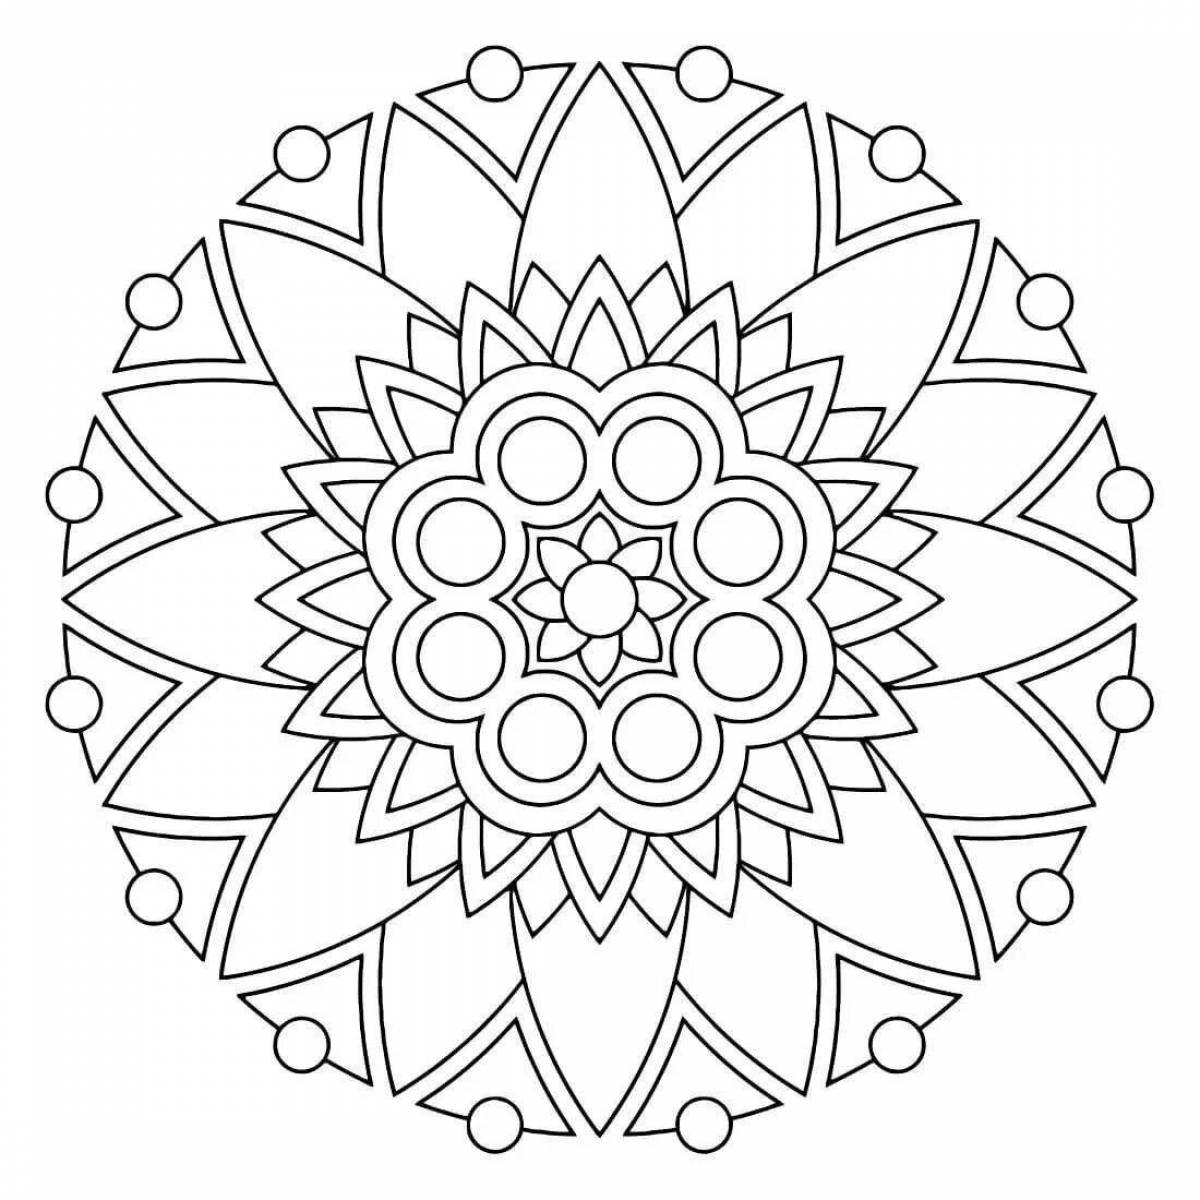 Good quality glitter mandala coloring pages